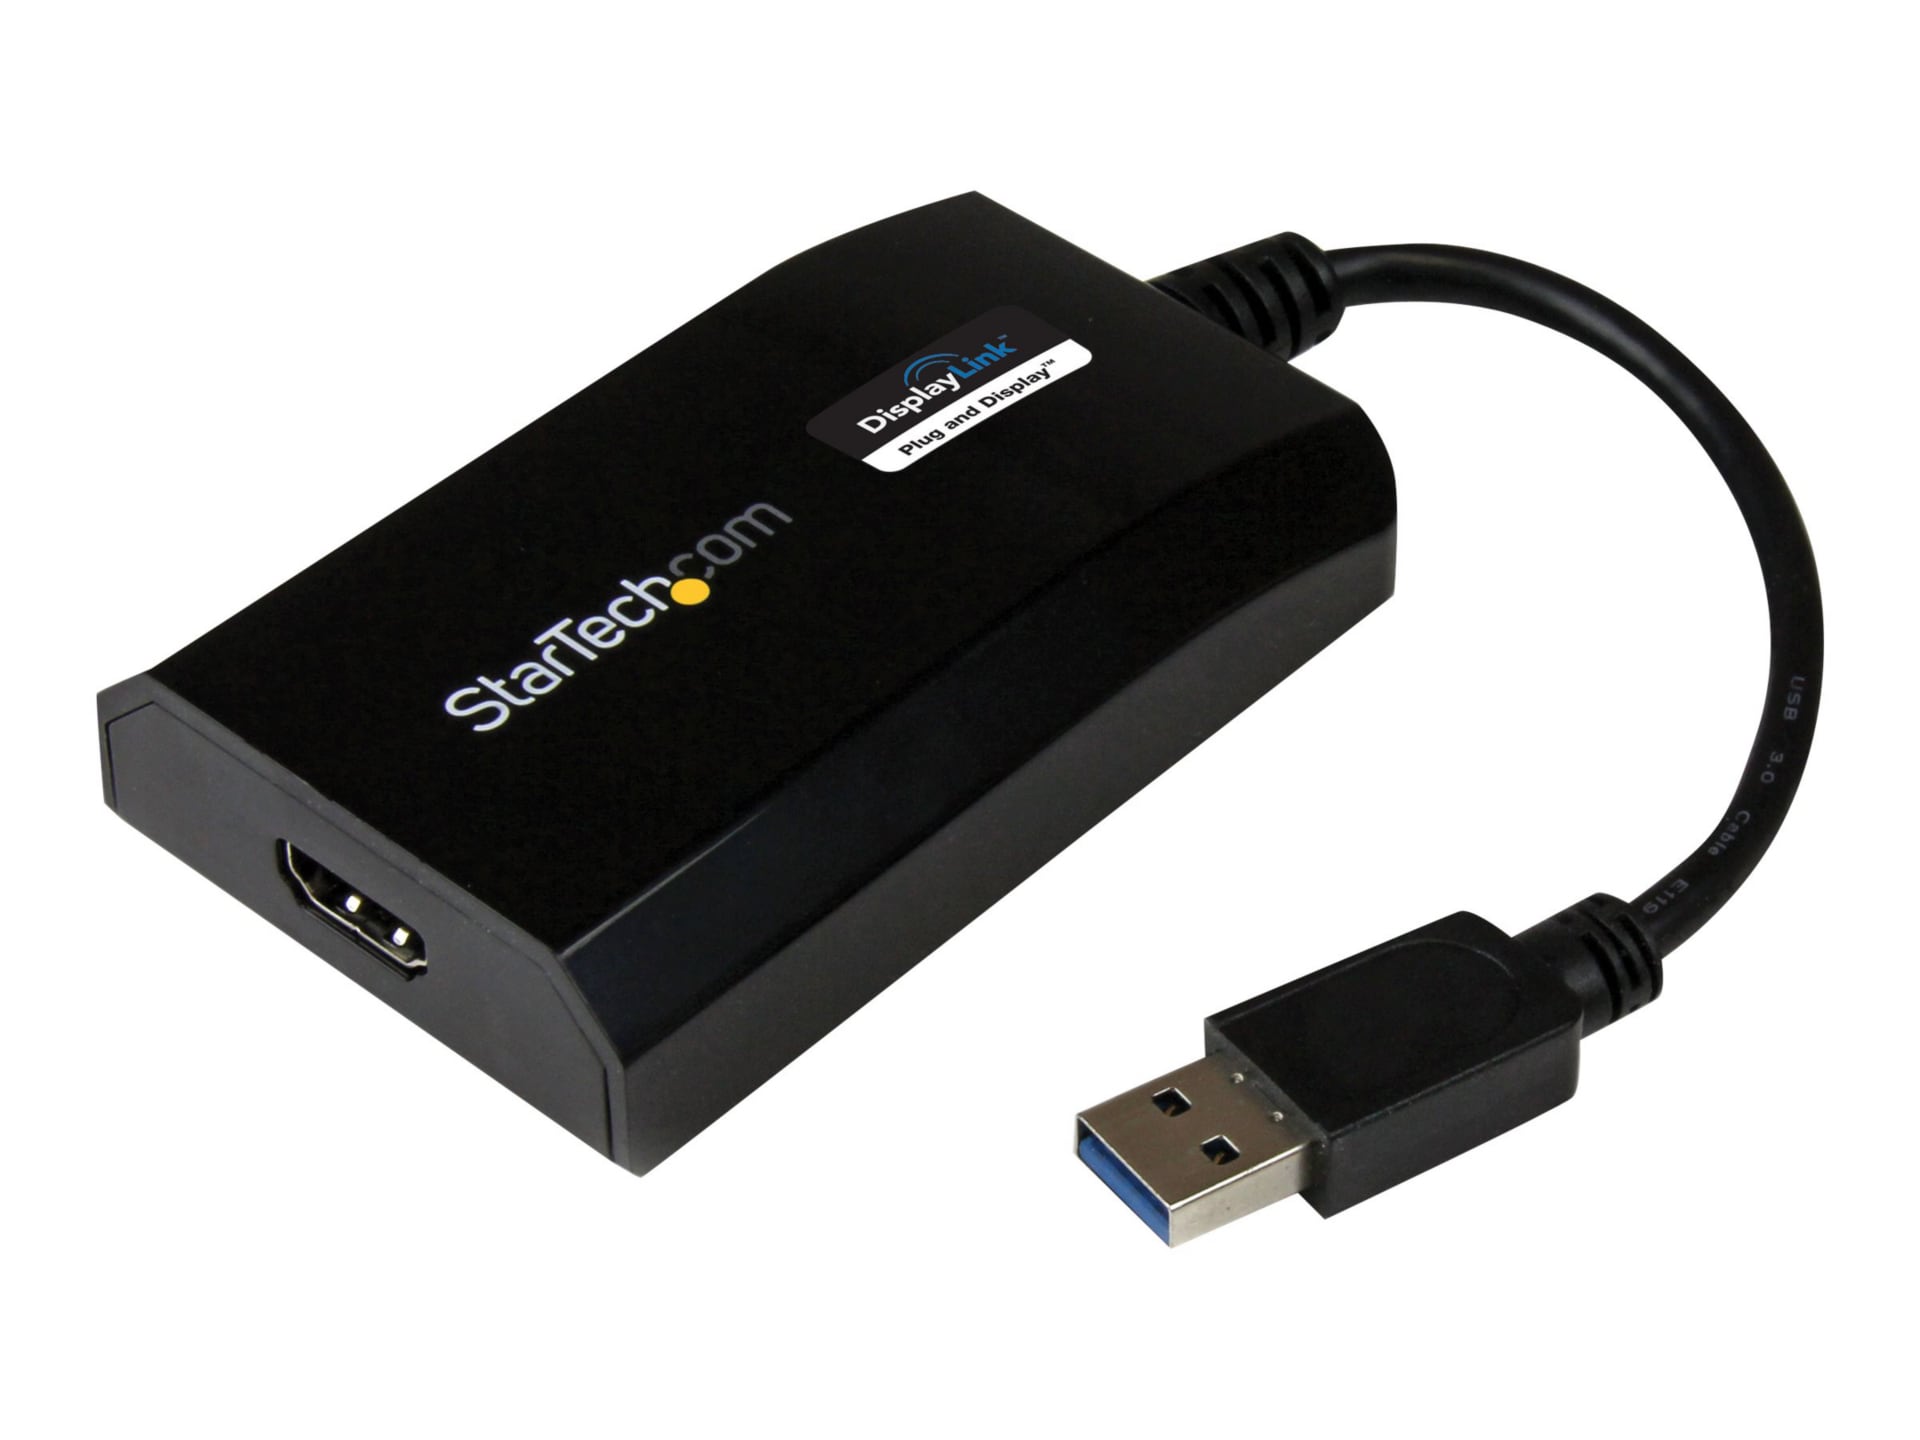 StarTech.com USB 3.0 to HDMI Adapter DisplayLink Certified - External Graphics for Mac/PC - USB32HDPRO - Monitor & Adapters - CDW.com